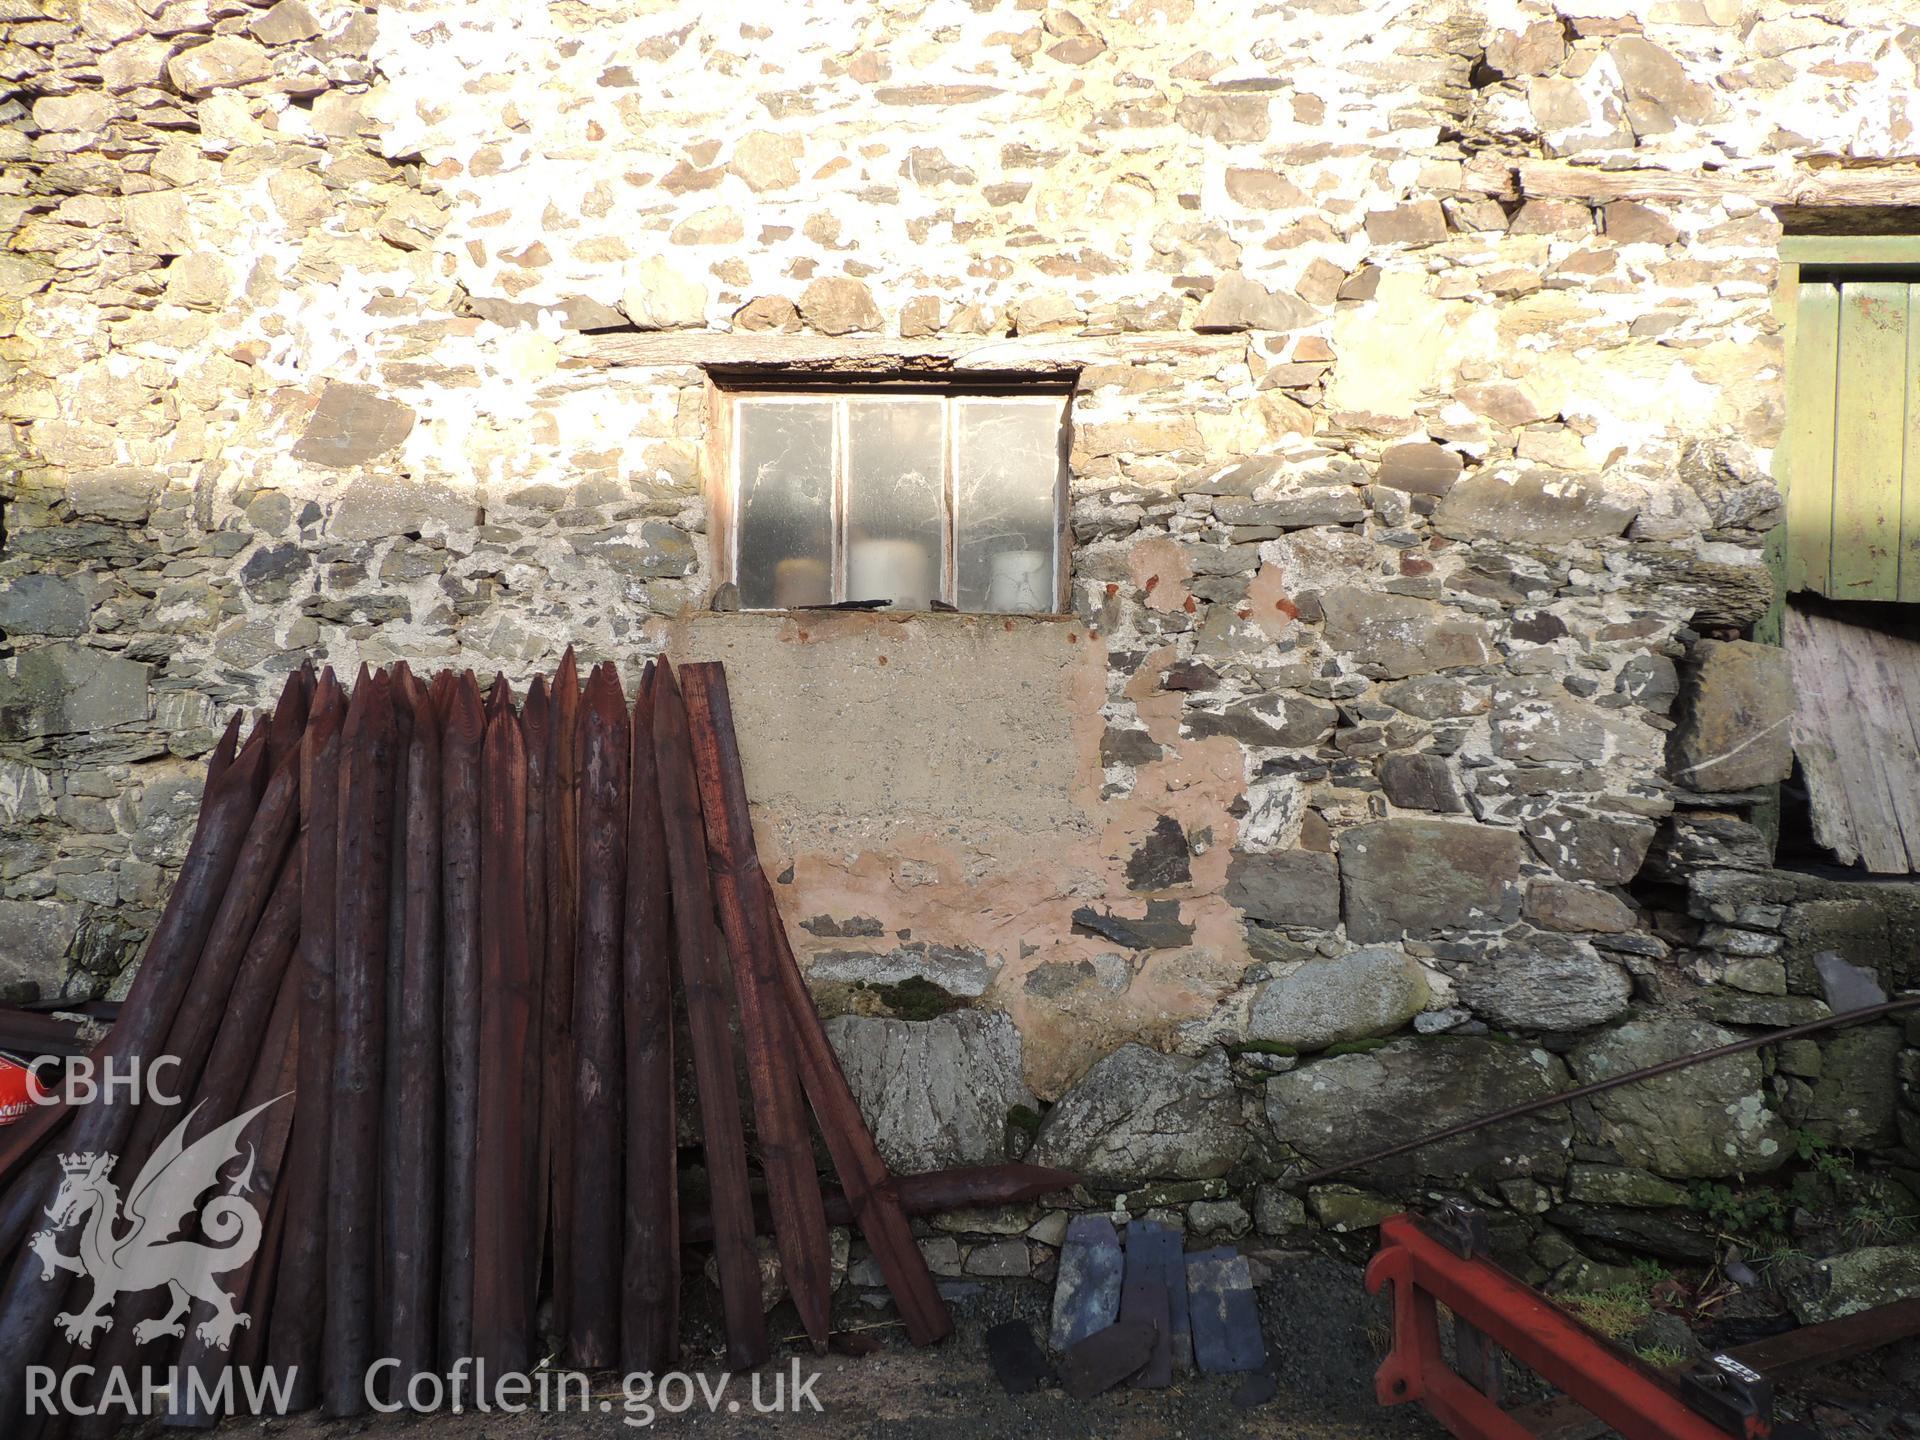 View of window opening, looking north. Photograph taken as part of archaeological building survey conducted at Bryn Gwylan Threshing Barn, Llangernyw, Conwy, carried out by Archaeology Wales, 2017-2018. Report no. 1640. Project no. 2578.